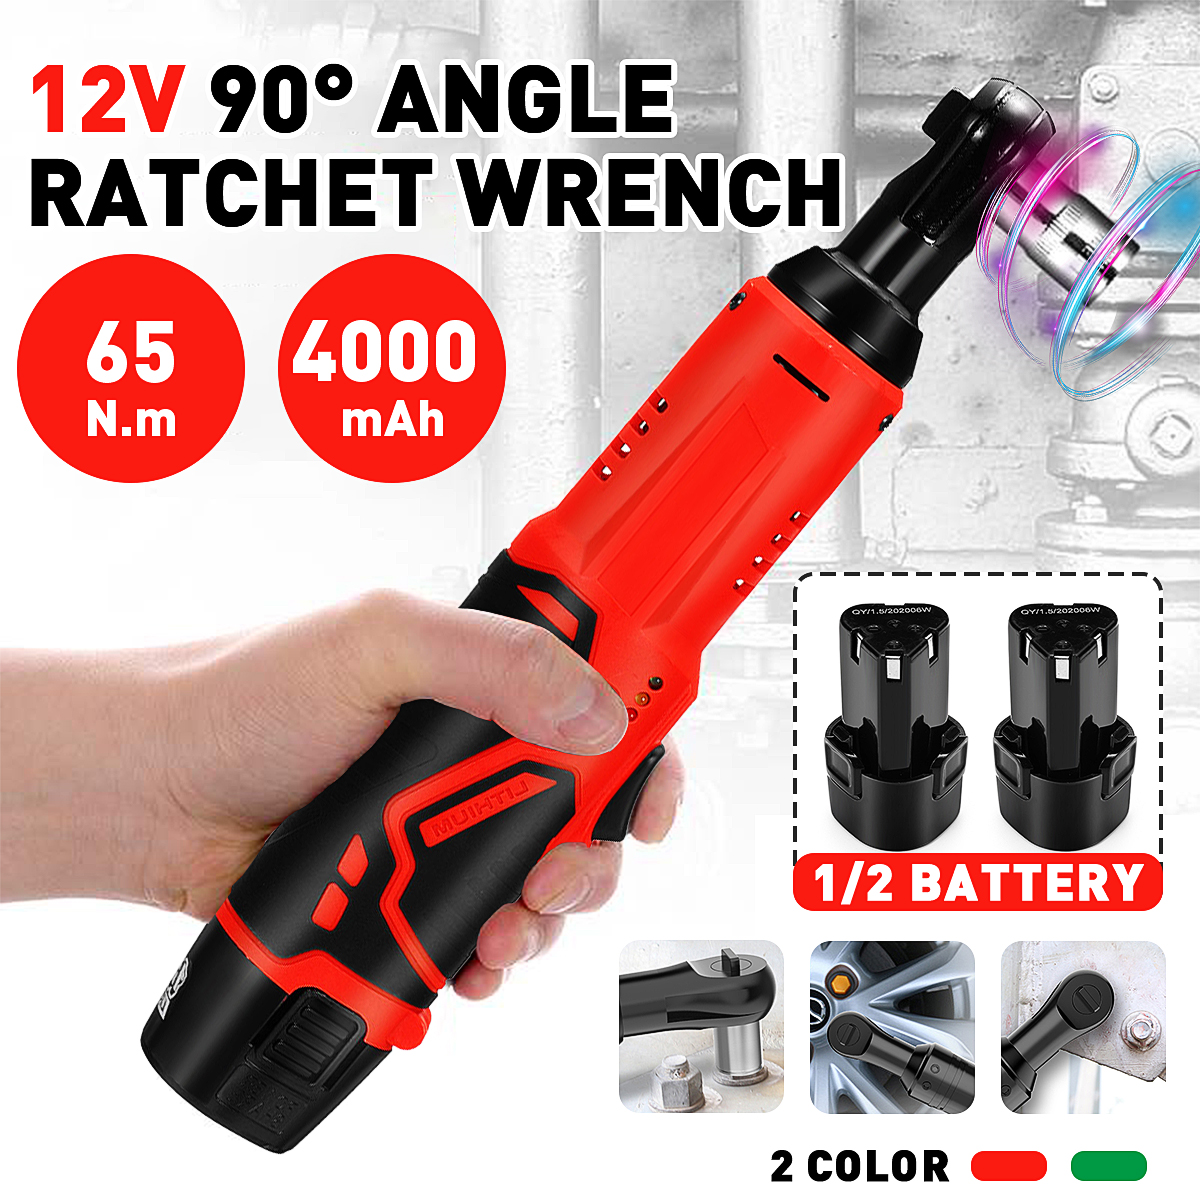 12V-4000mAh-Electric-Ratchet-Wrench-With-LED-Light-90deg-Angle-Wrench-Tool-W-12pcs-Battery-1714982-1